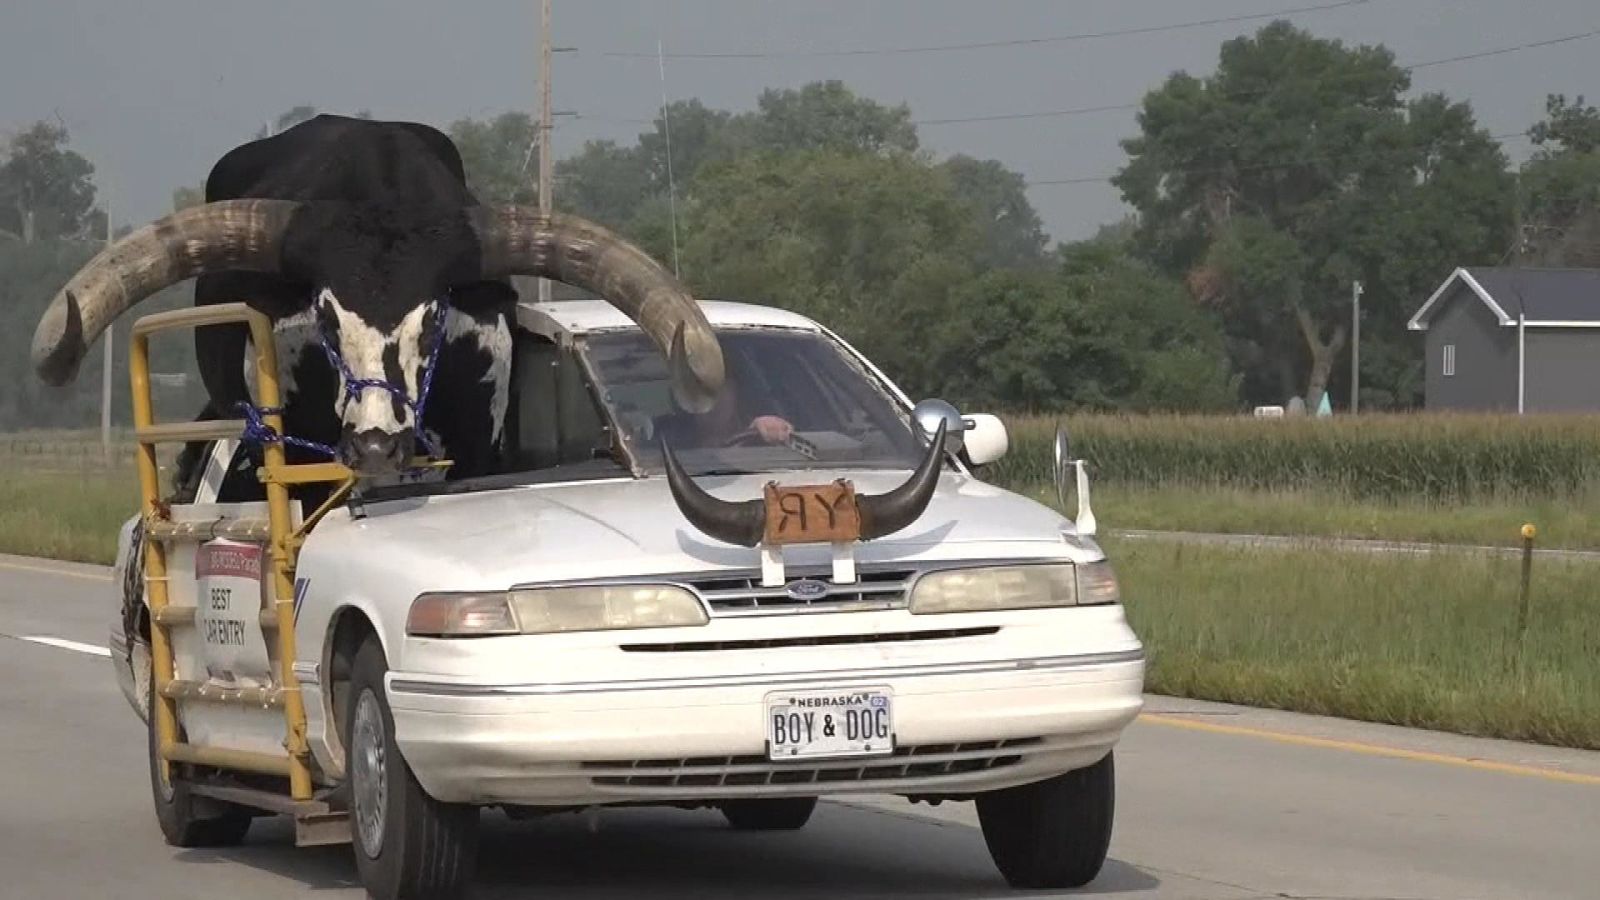 Nebraska man pulled over for driving with massive bull named 'Howdy Doody' in  front seat